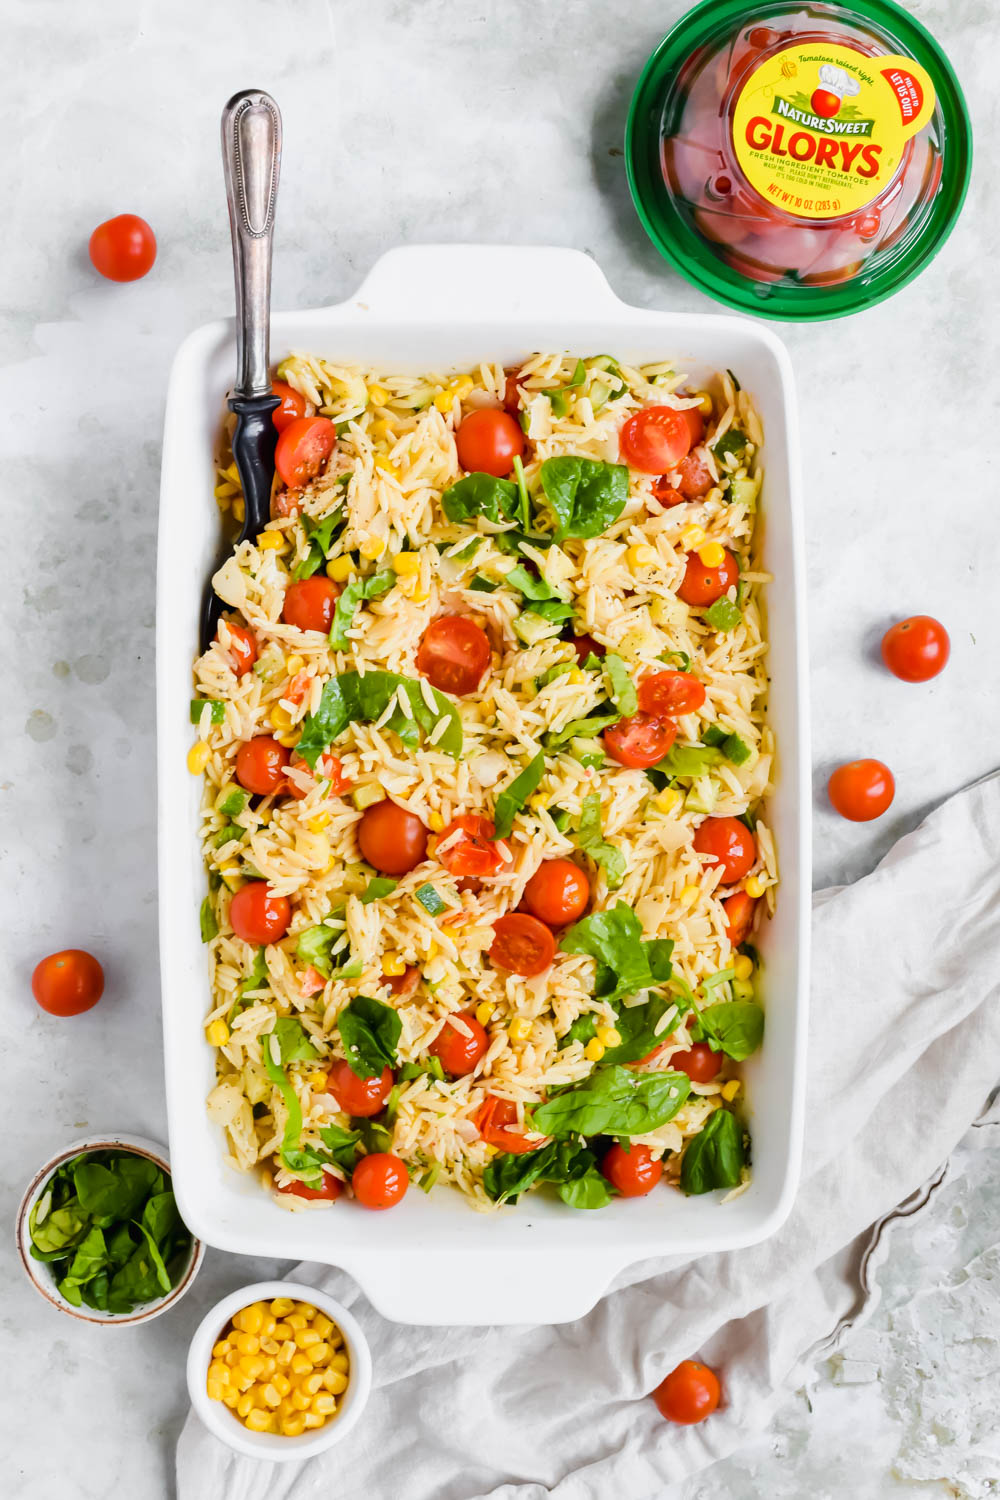 prepared summer orzo salad in white baking dish surrounded by additional recipe ingredients on white background.